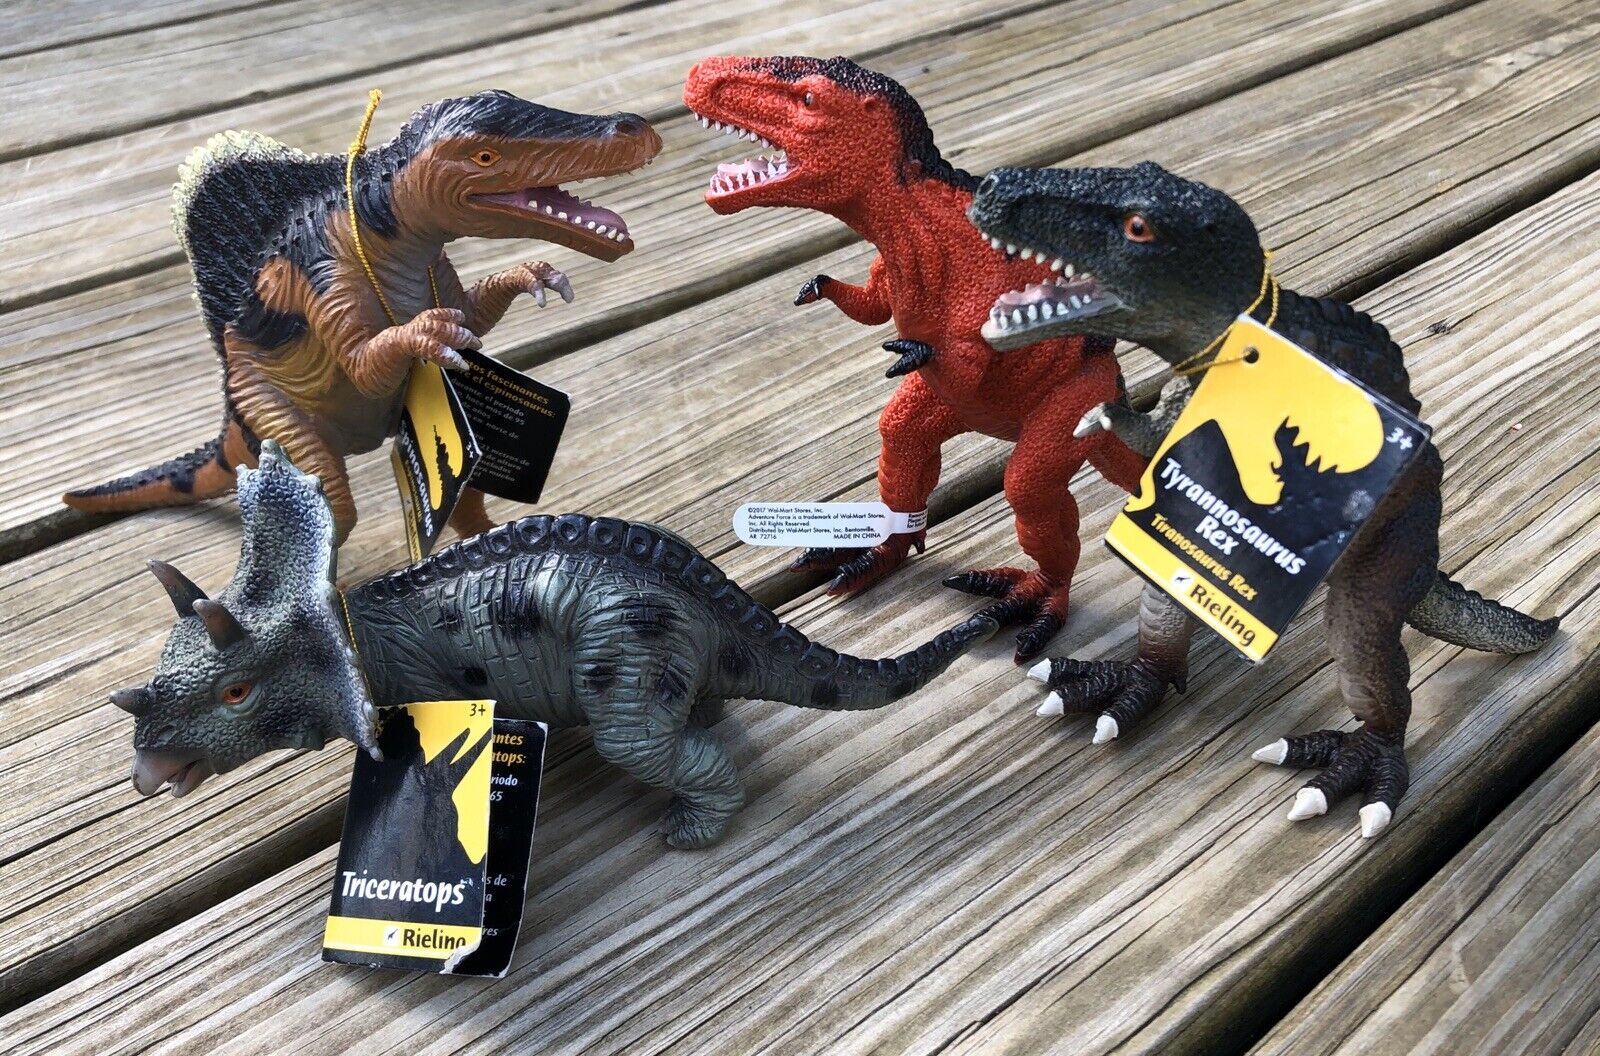 Lot of 4 Realistic Toy Dinosaurs NWT Rieling New - Tyrannosaurus Triceratops